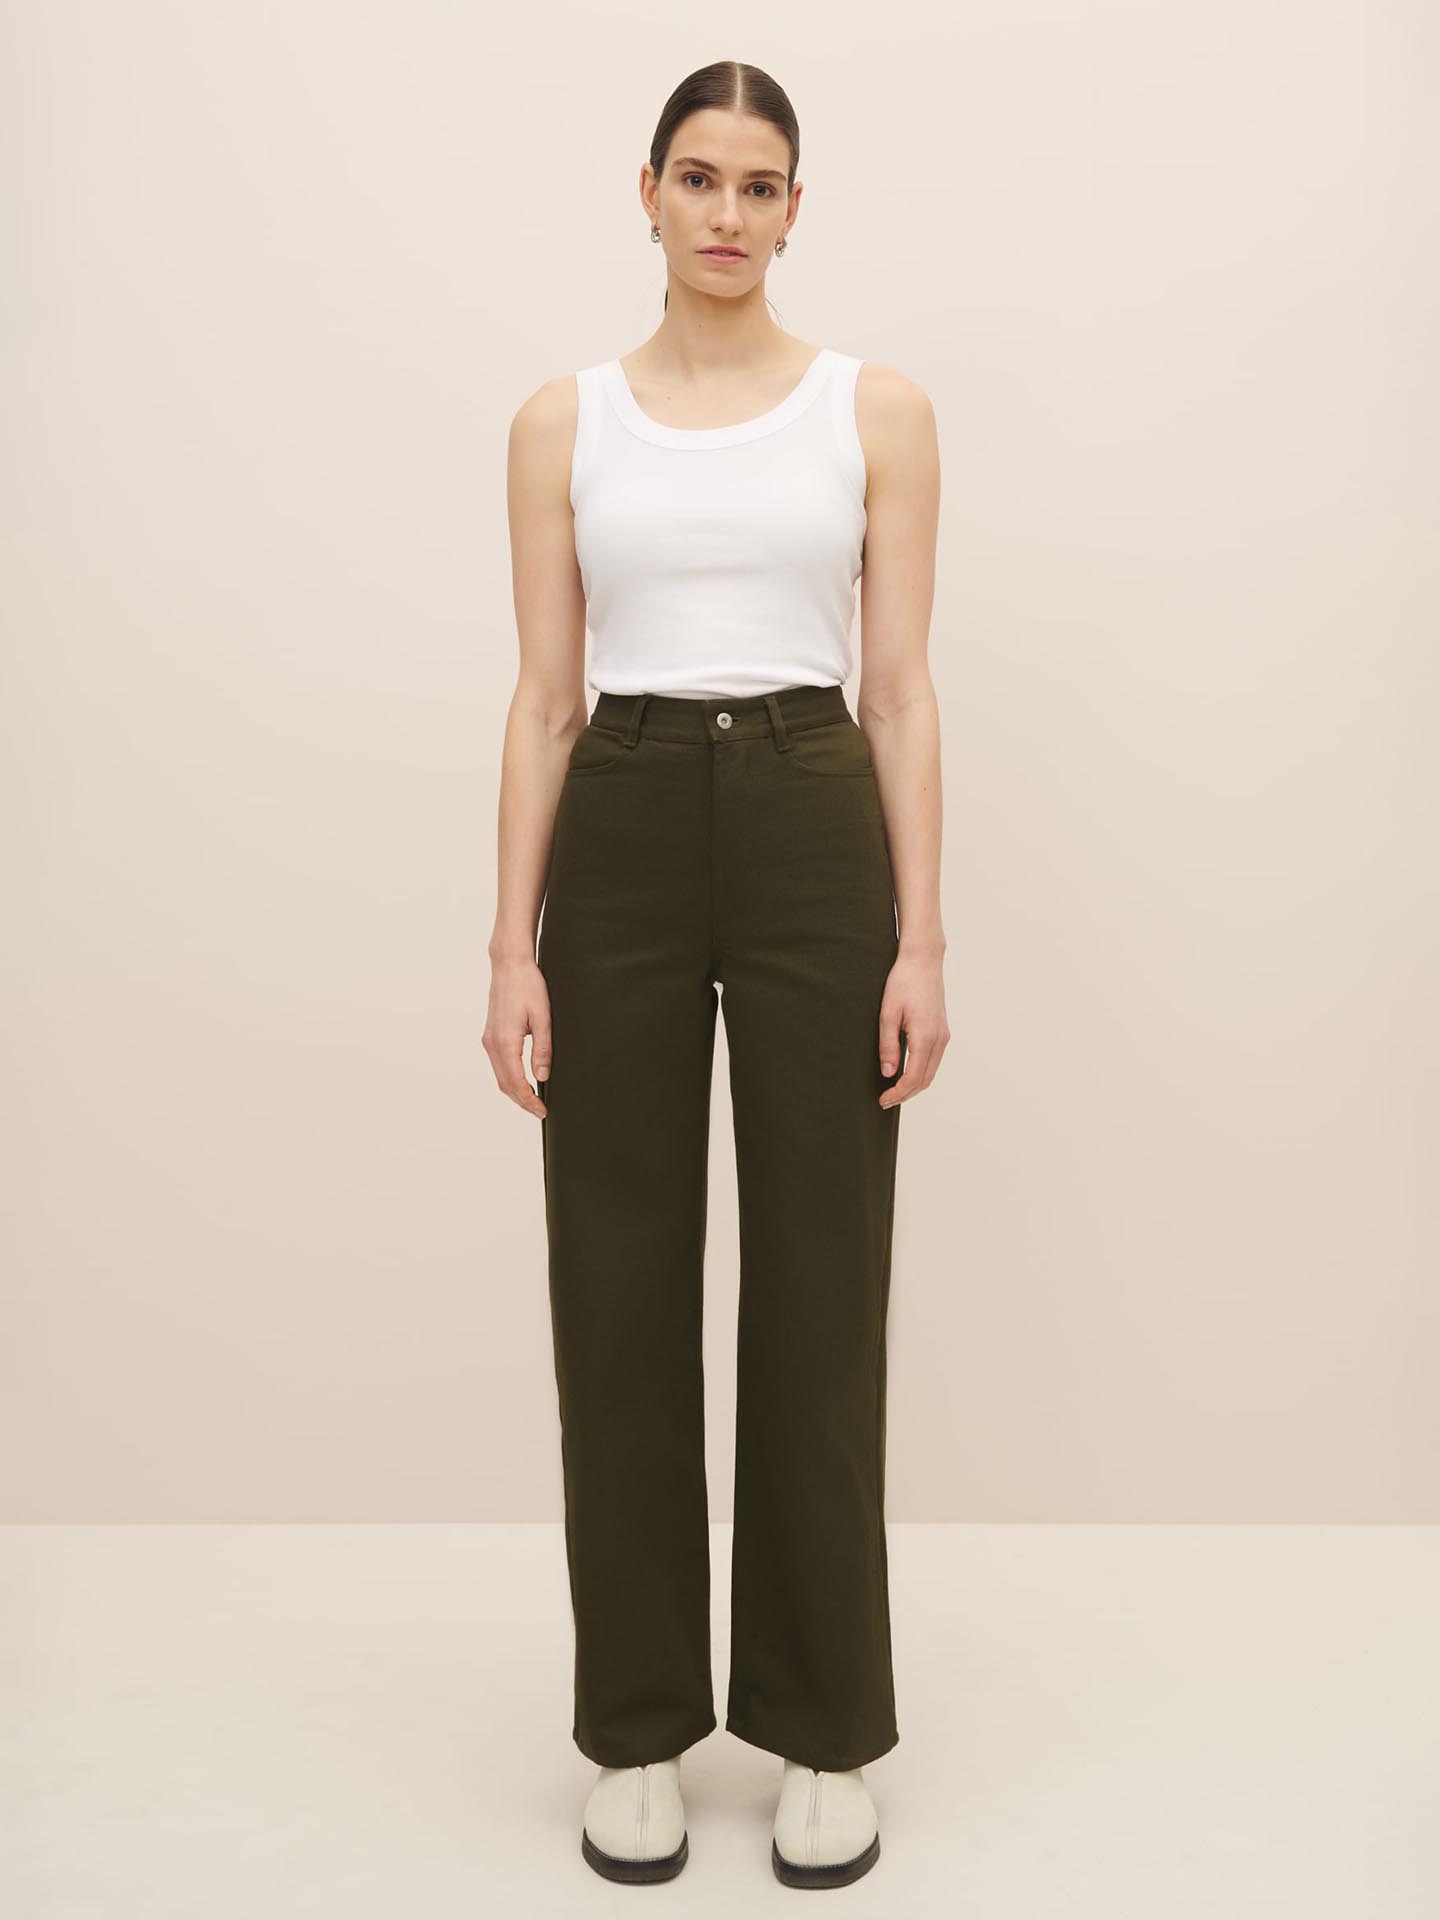 The model is wearing a white tank top and olive green fairtrade organic cotton Straight Leg Jeans – Khaki Denim pants by Kowtow.